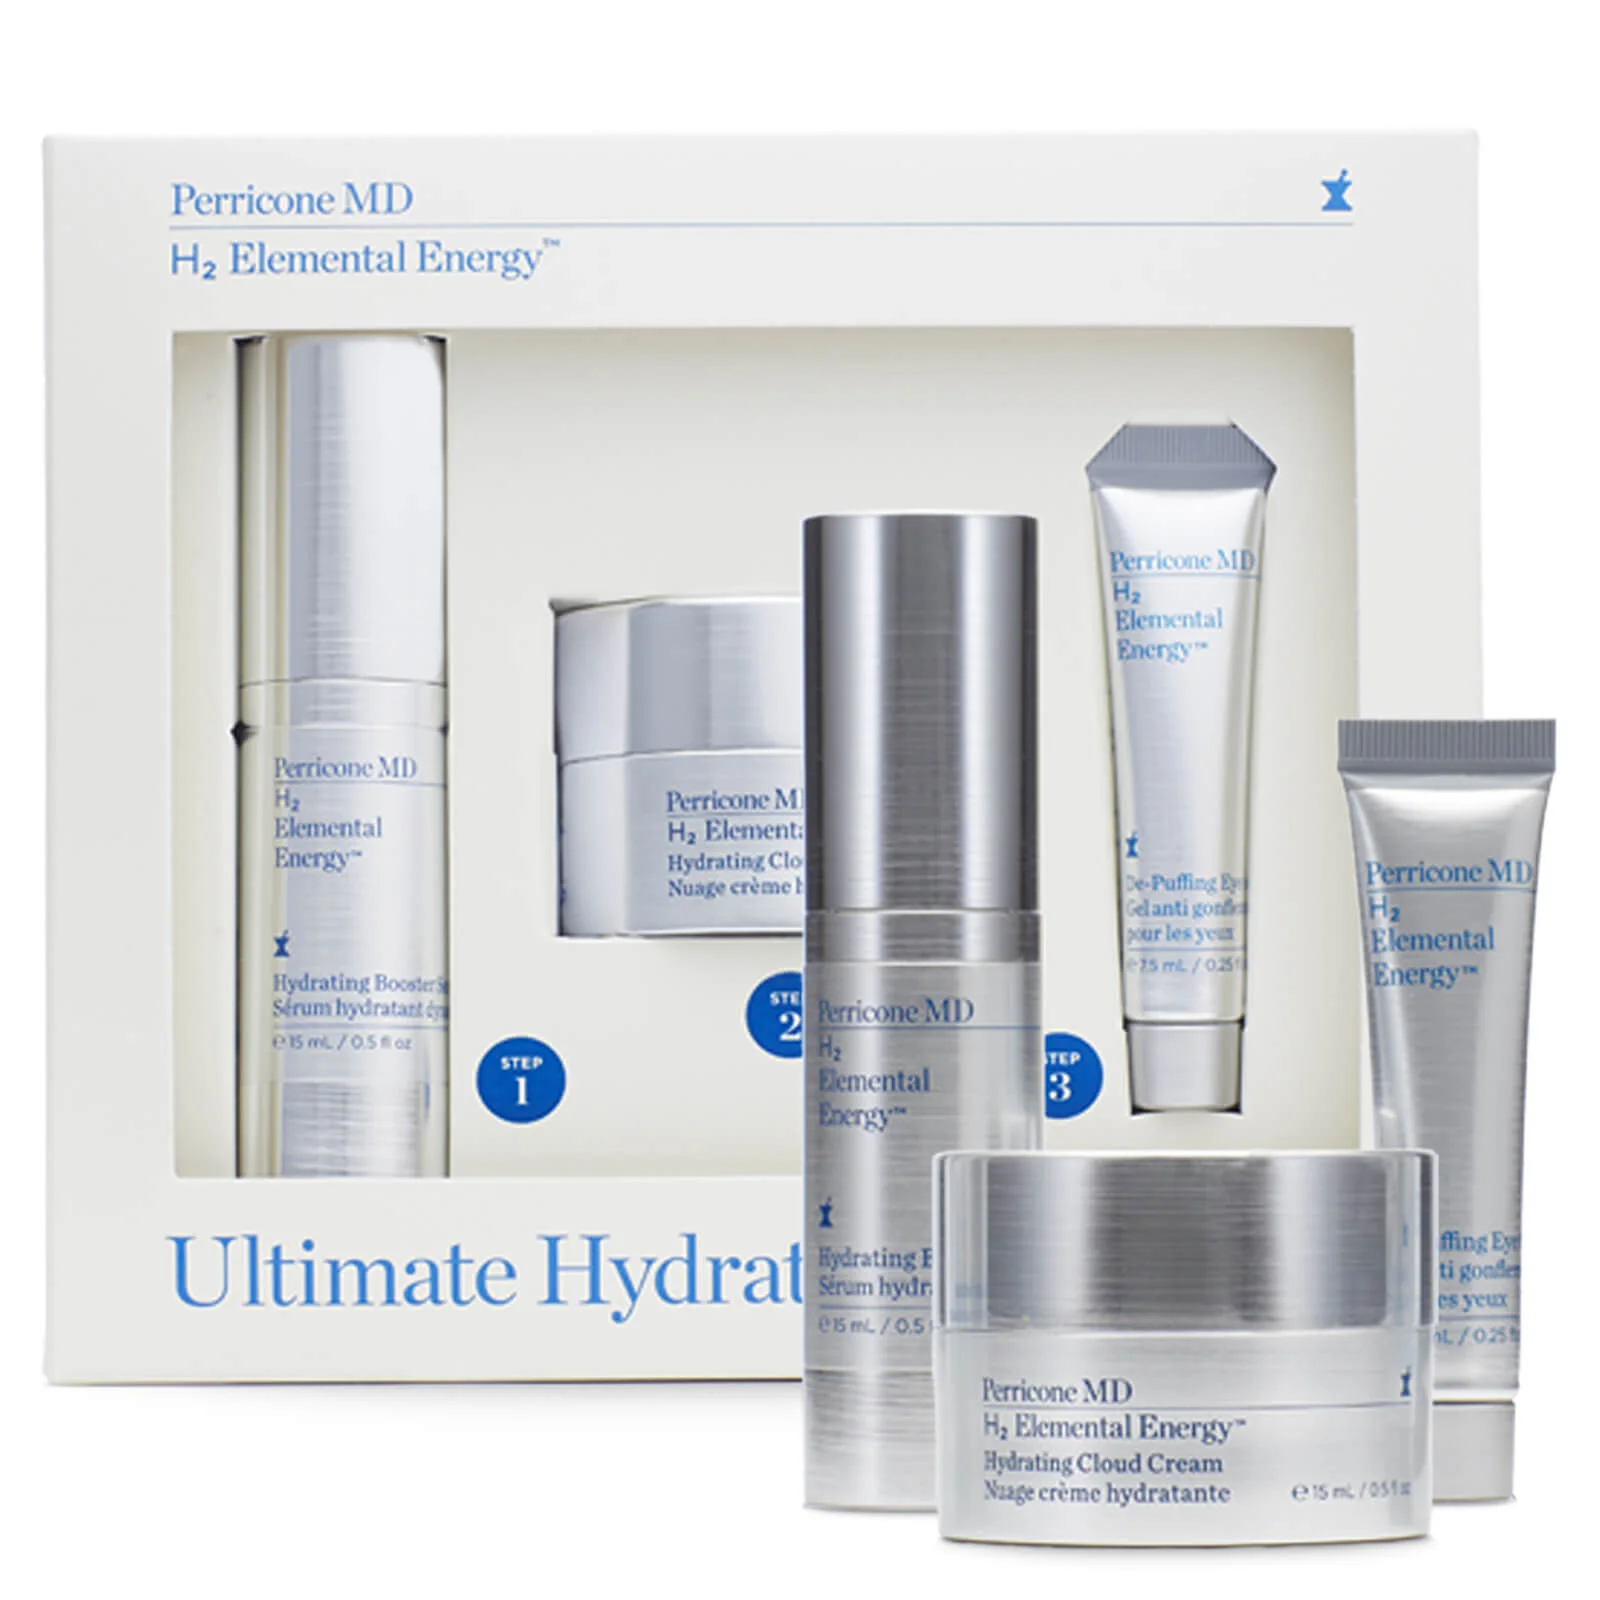 Perricone MD H2 Elemental Energy Ultimate Hydration Starter Kit (Worth £90) Image 1